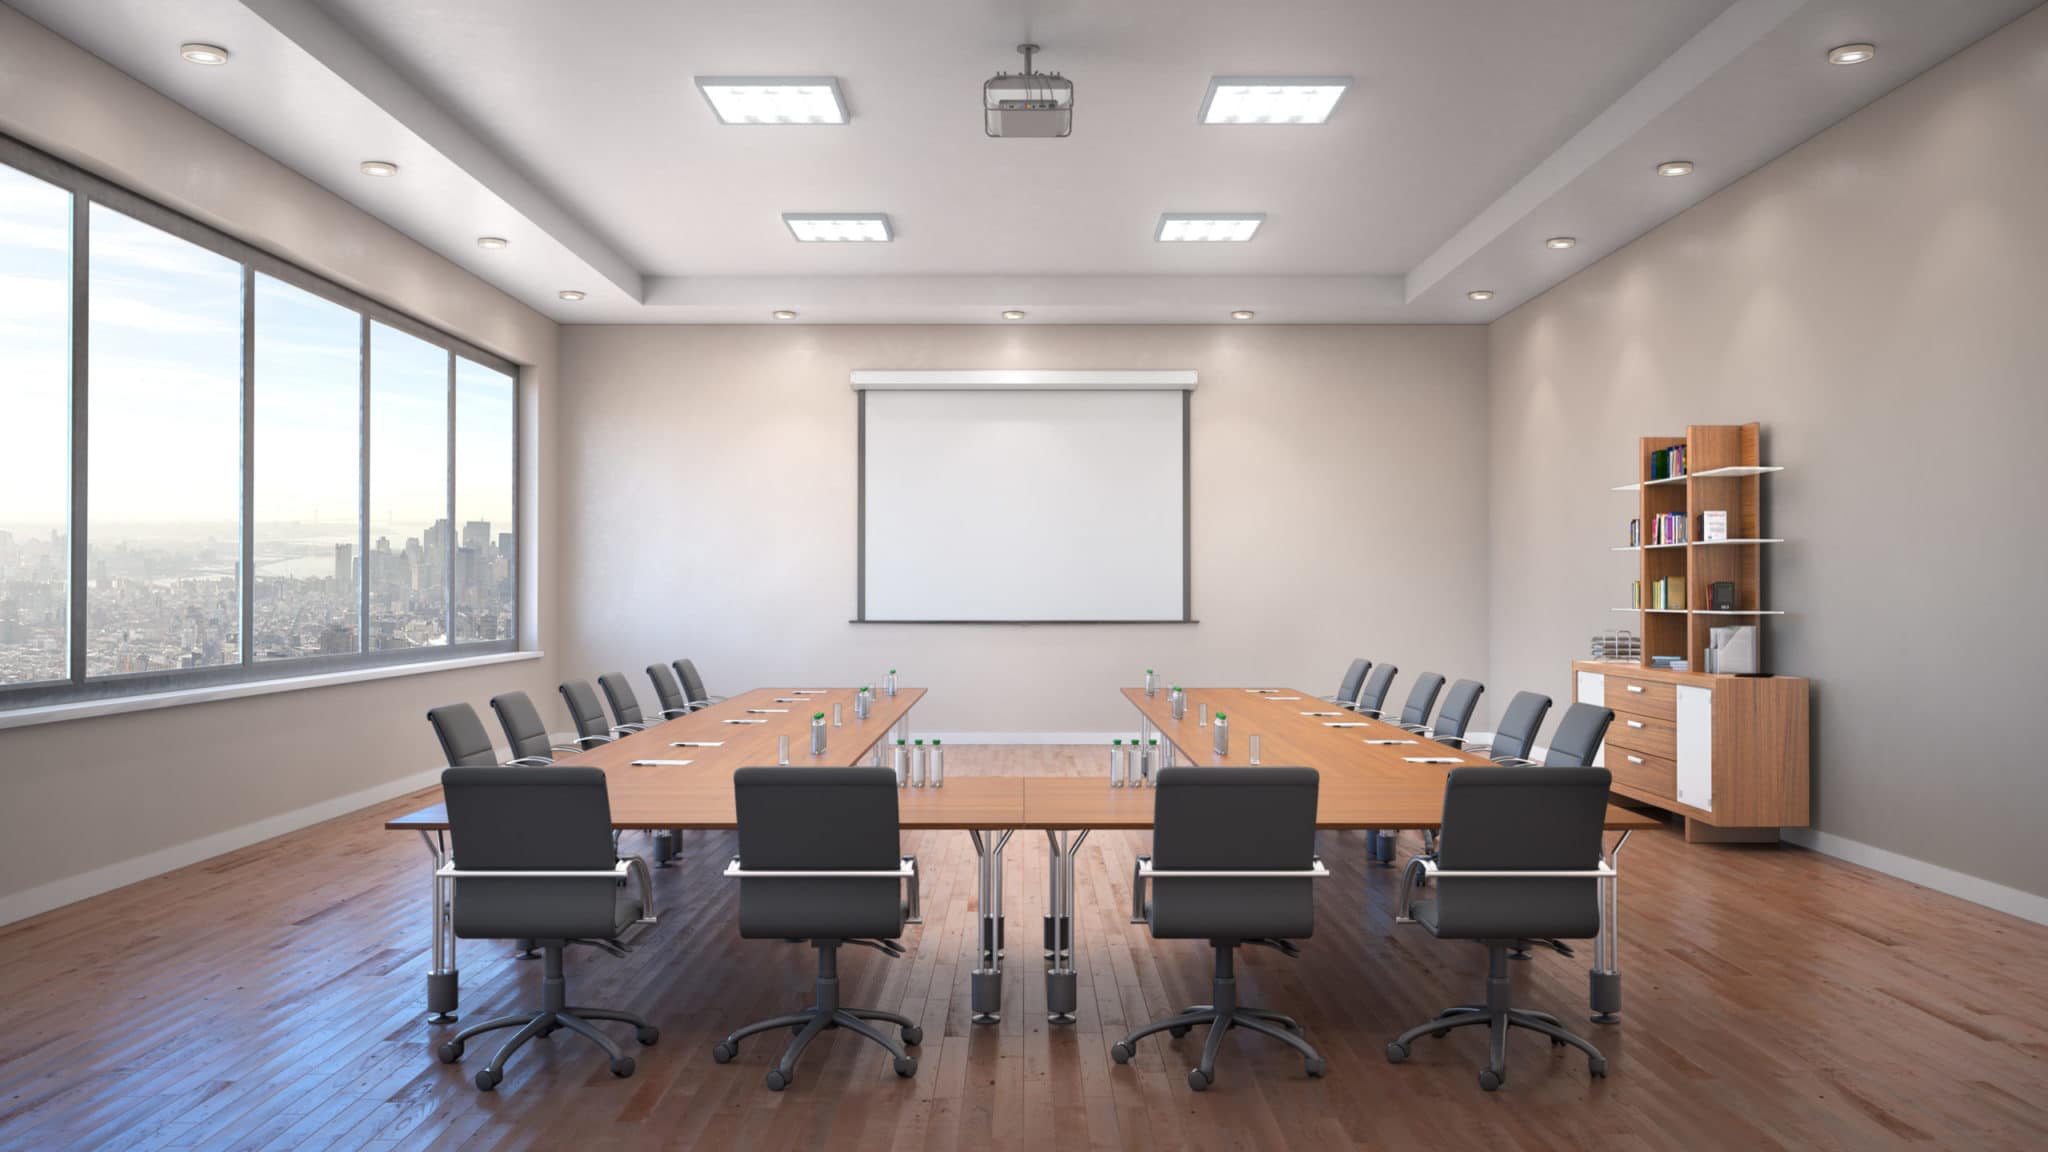 Commercial electrician services used in a conference room interior lighting - High Quality Electric NJ